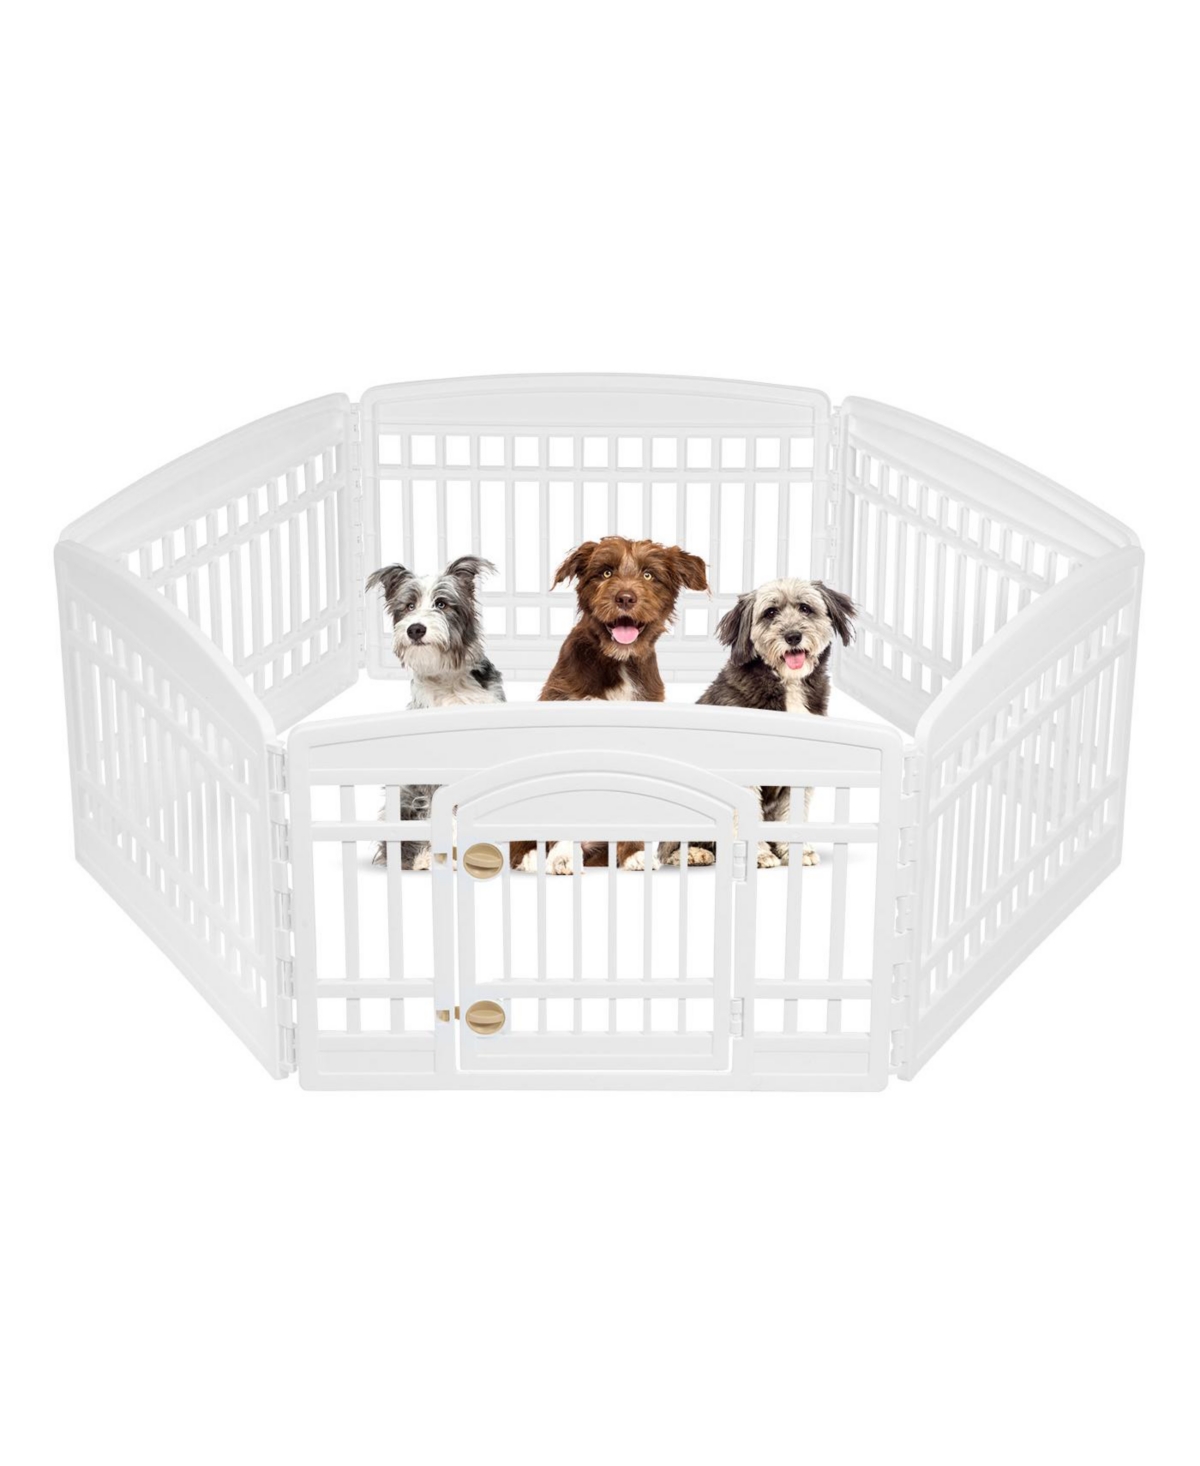 24" Exercise 6-Panel Pet Playpen with Door, Dog Cat Playpen For Puppy Small Dogs Keep Pets Secure Easy Assemble Easy Storing Customizable Non